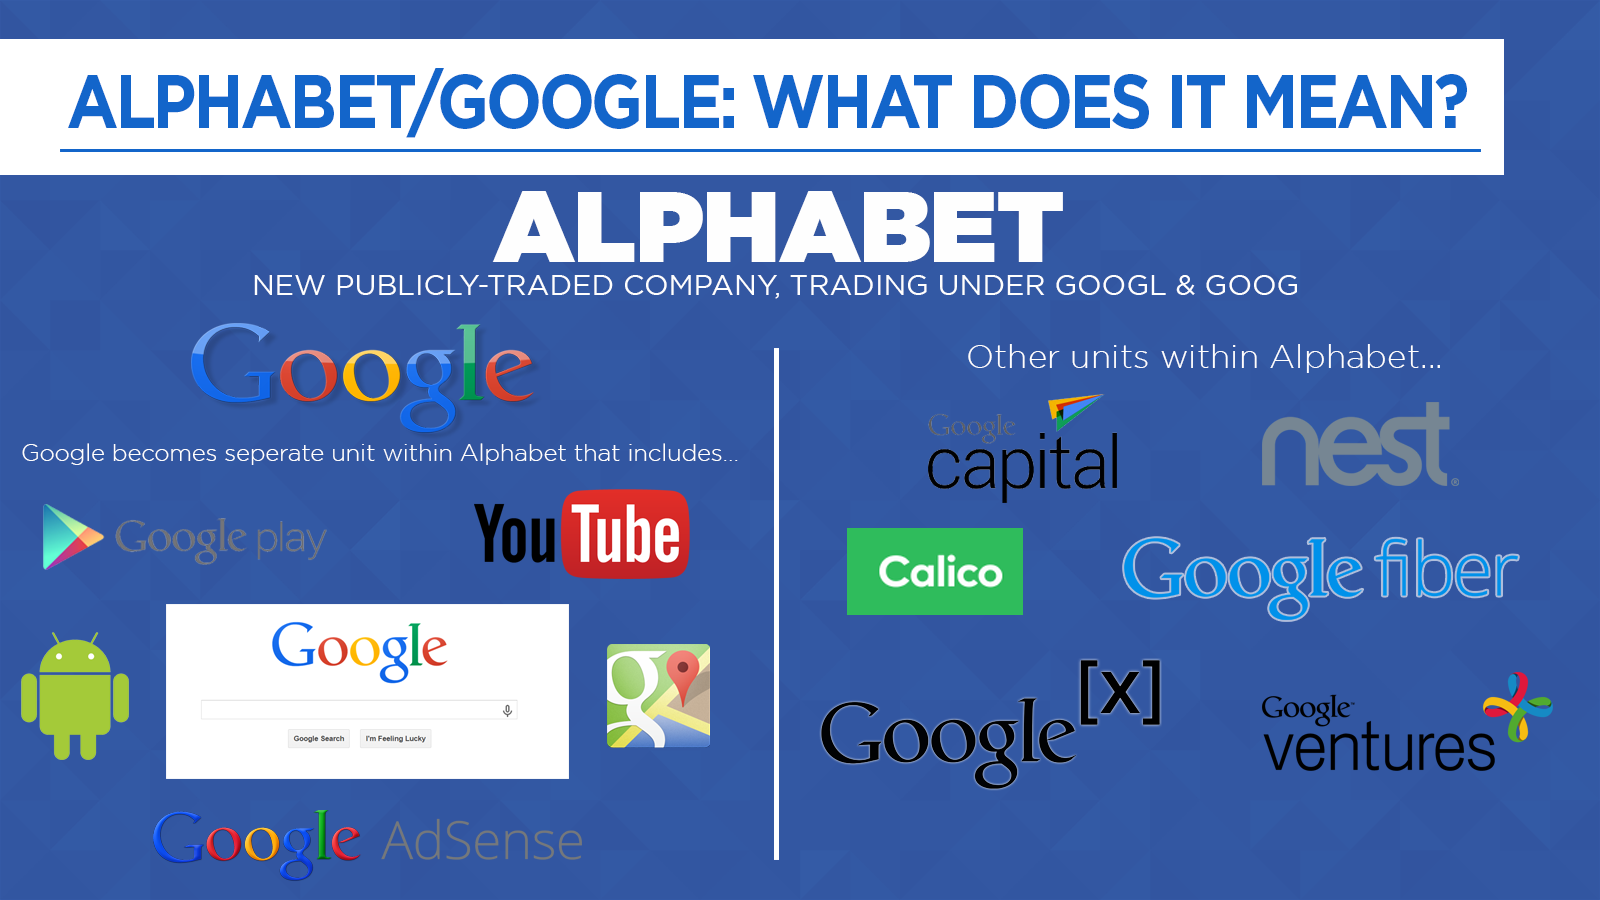 Why did Google change their name?